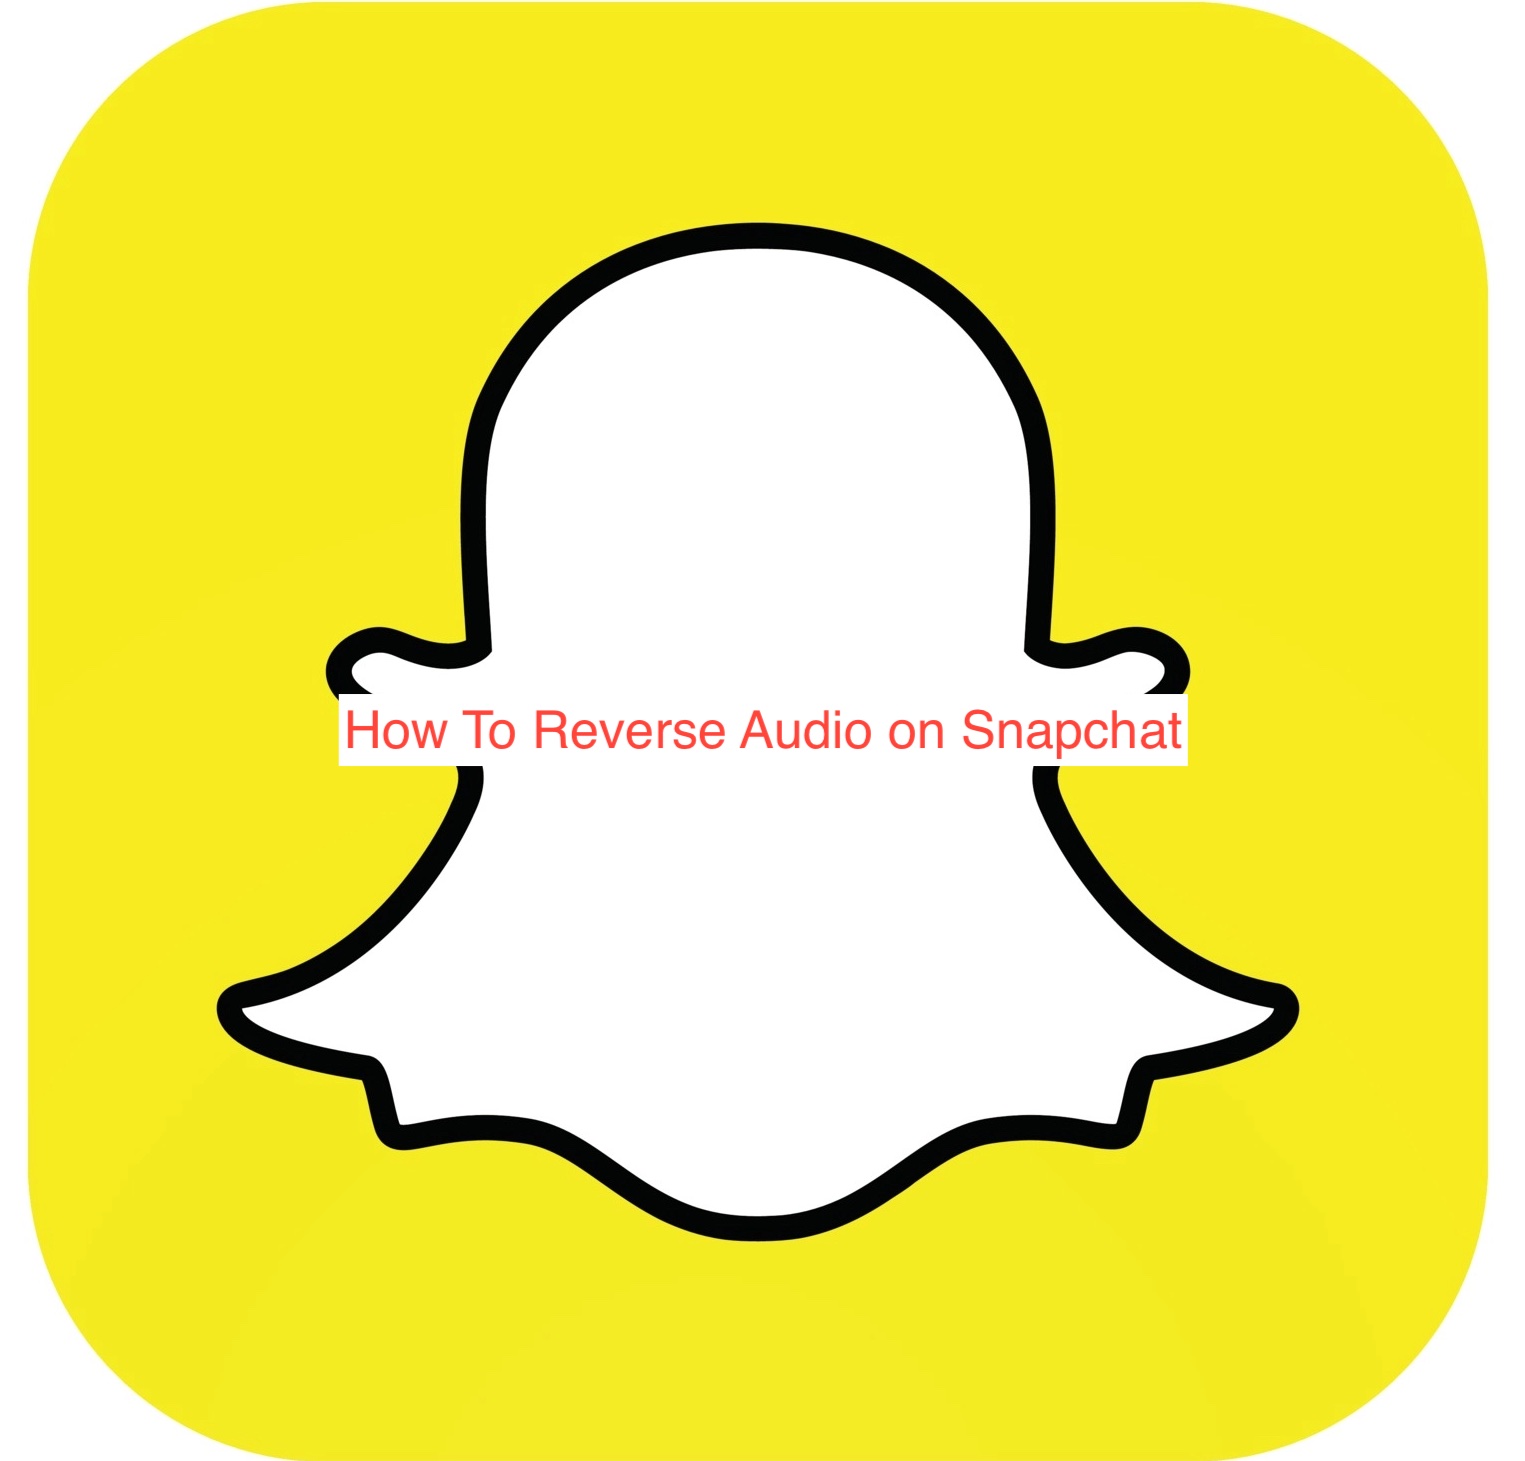 How To Reverse Audio on Snapchat